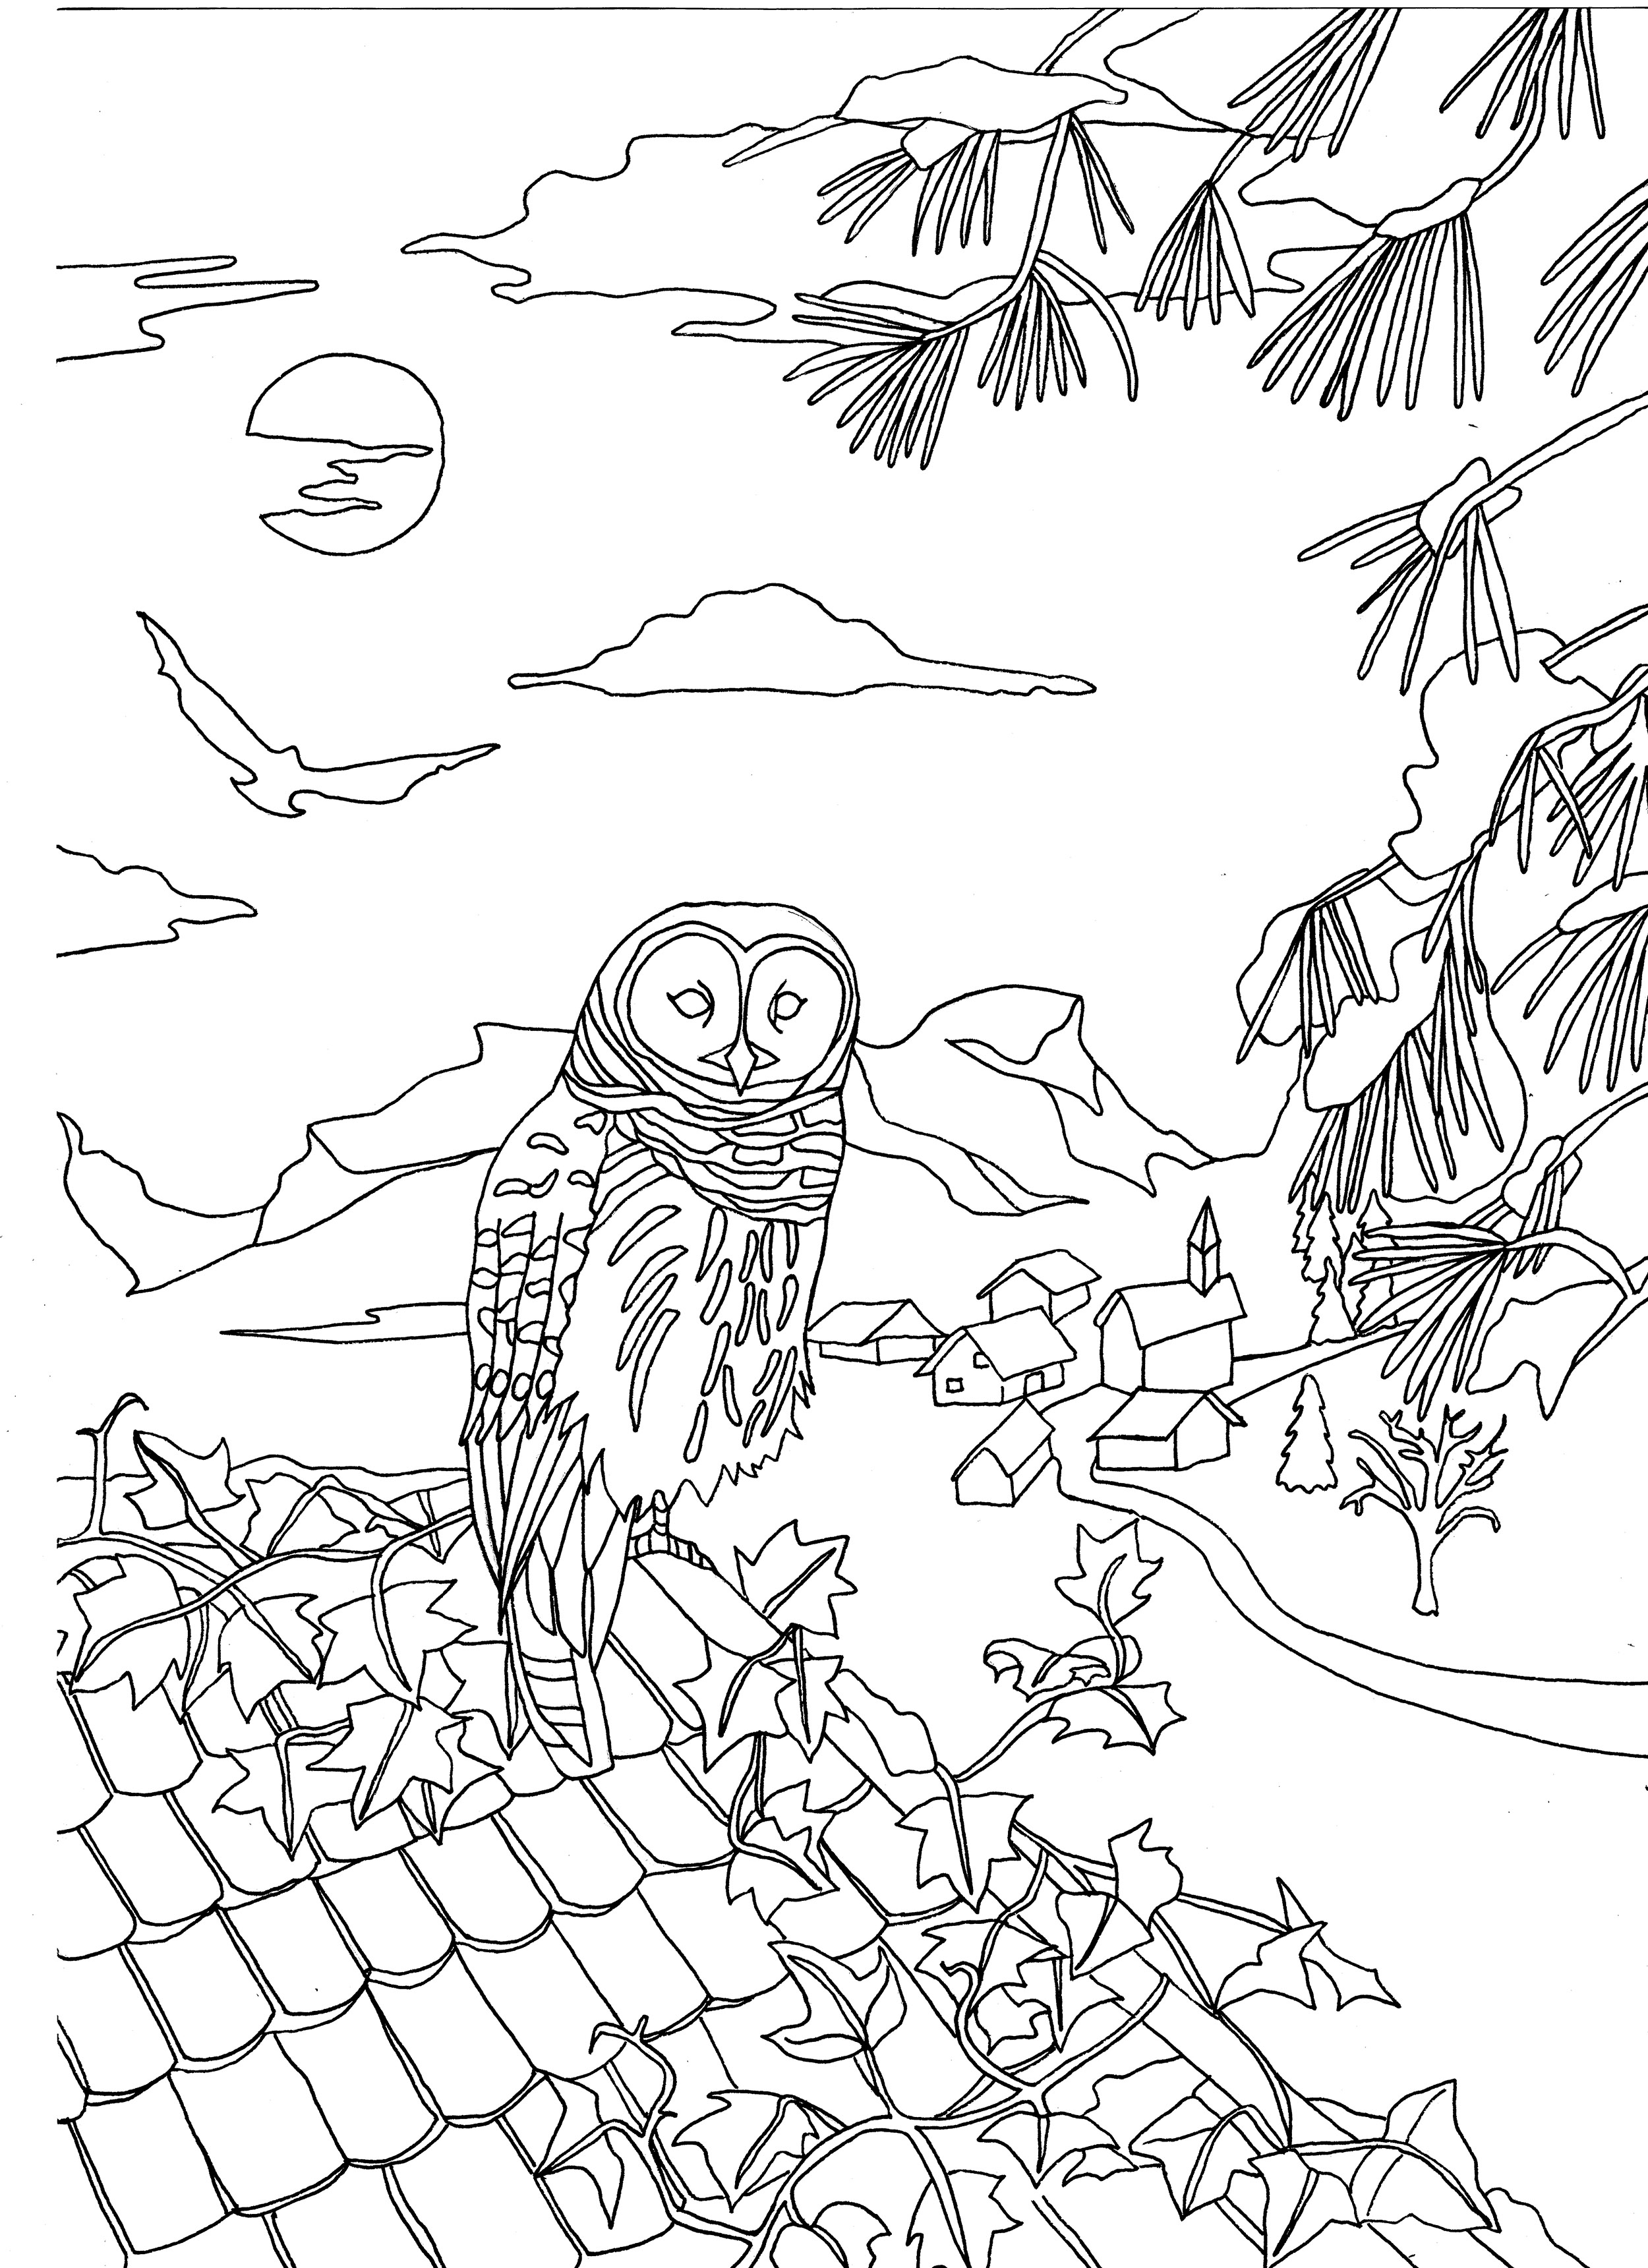 Adult coloring page to print and color for free